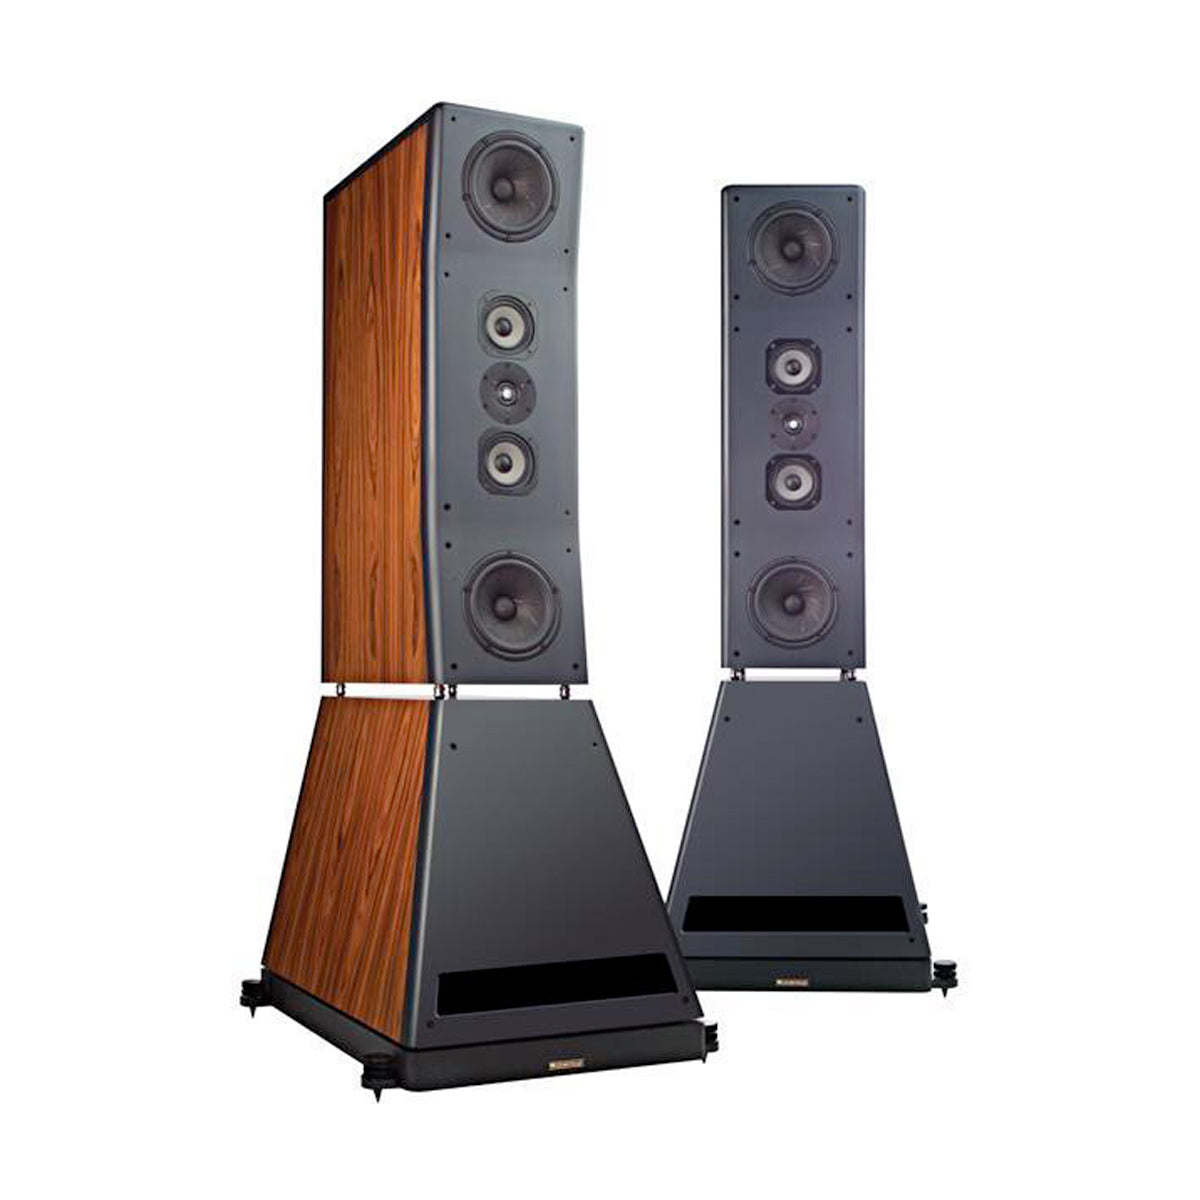 Whatmough PARAGON FLAGSHIP 4-Way Speakers - The Audio Experts